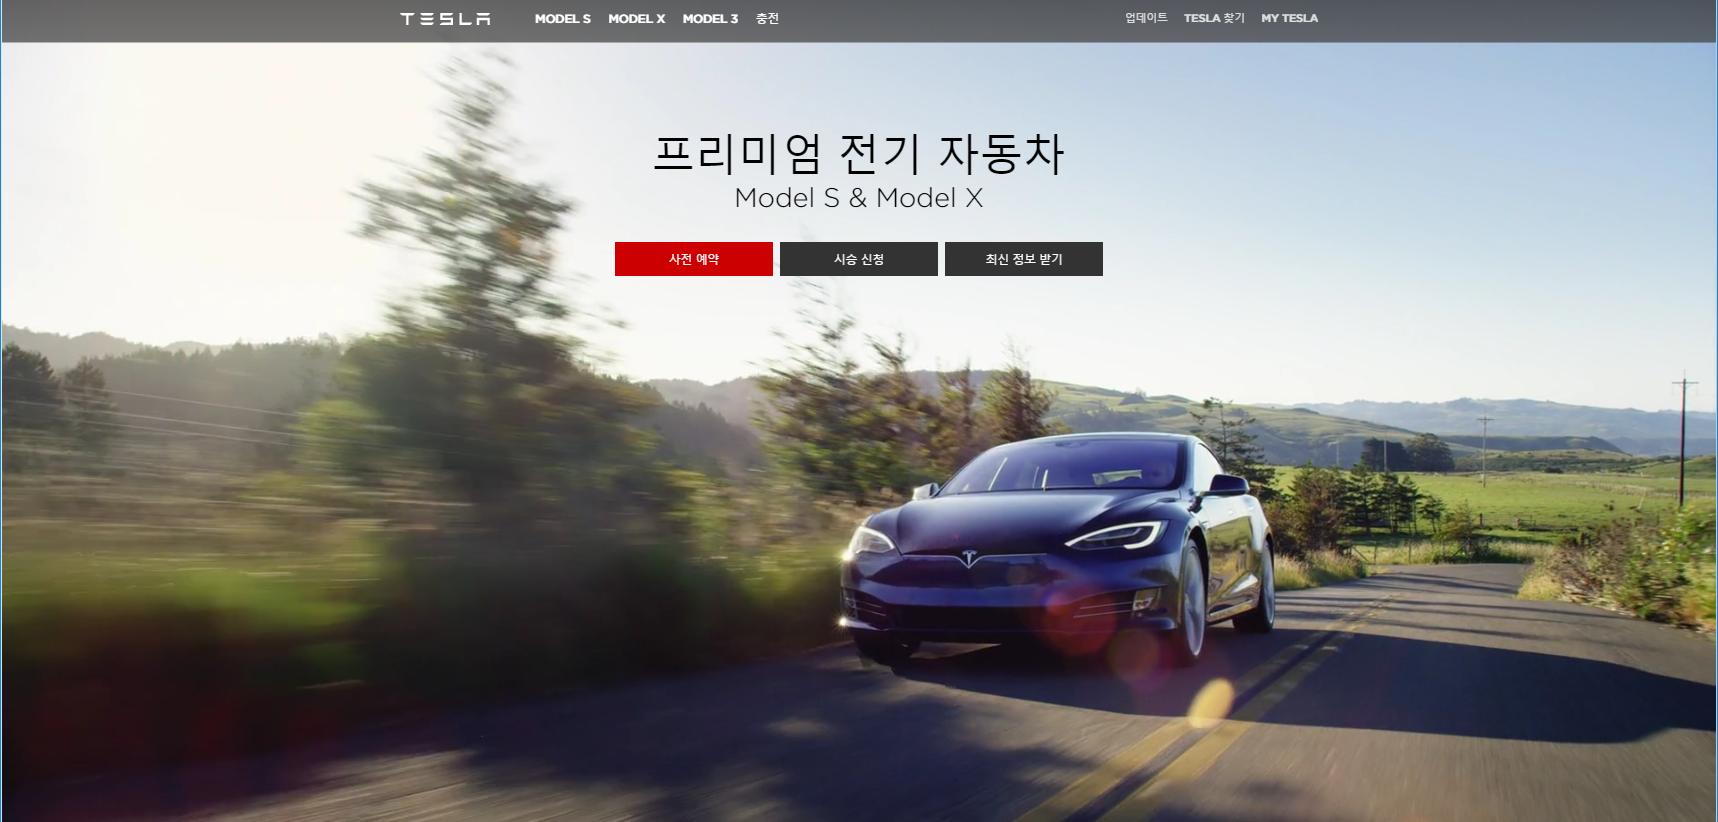 Tesla expands to South Korea, starts taking pre-orders for the Model S